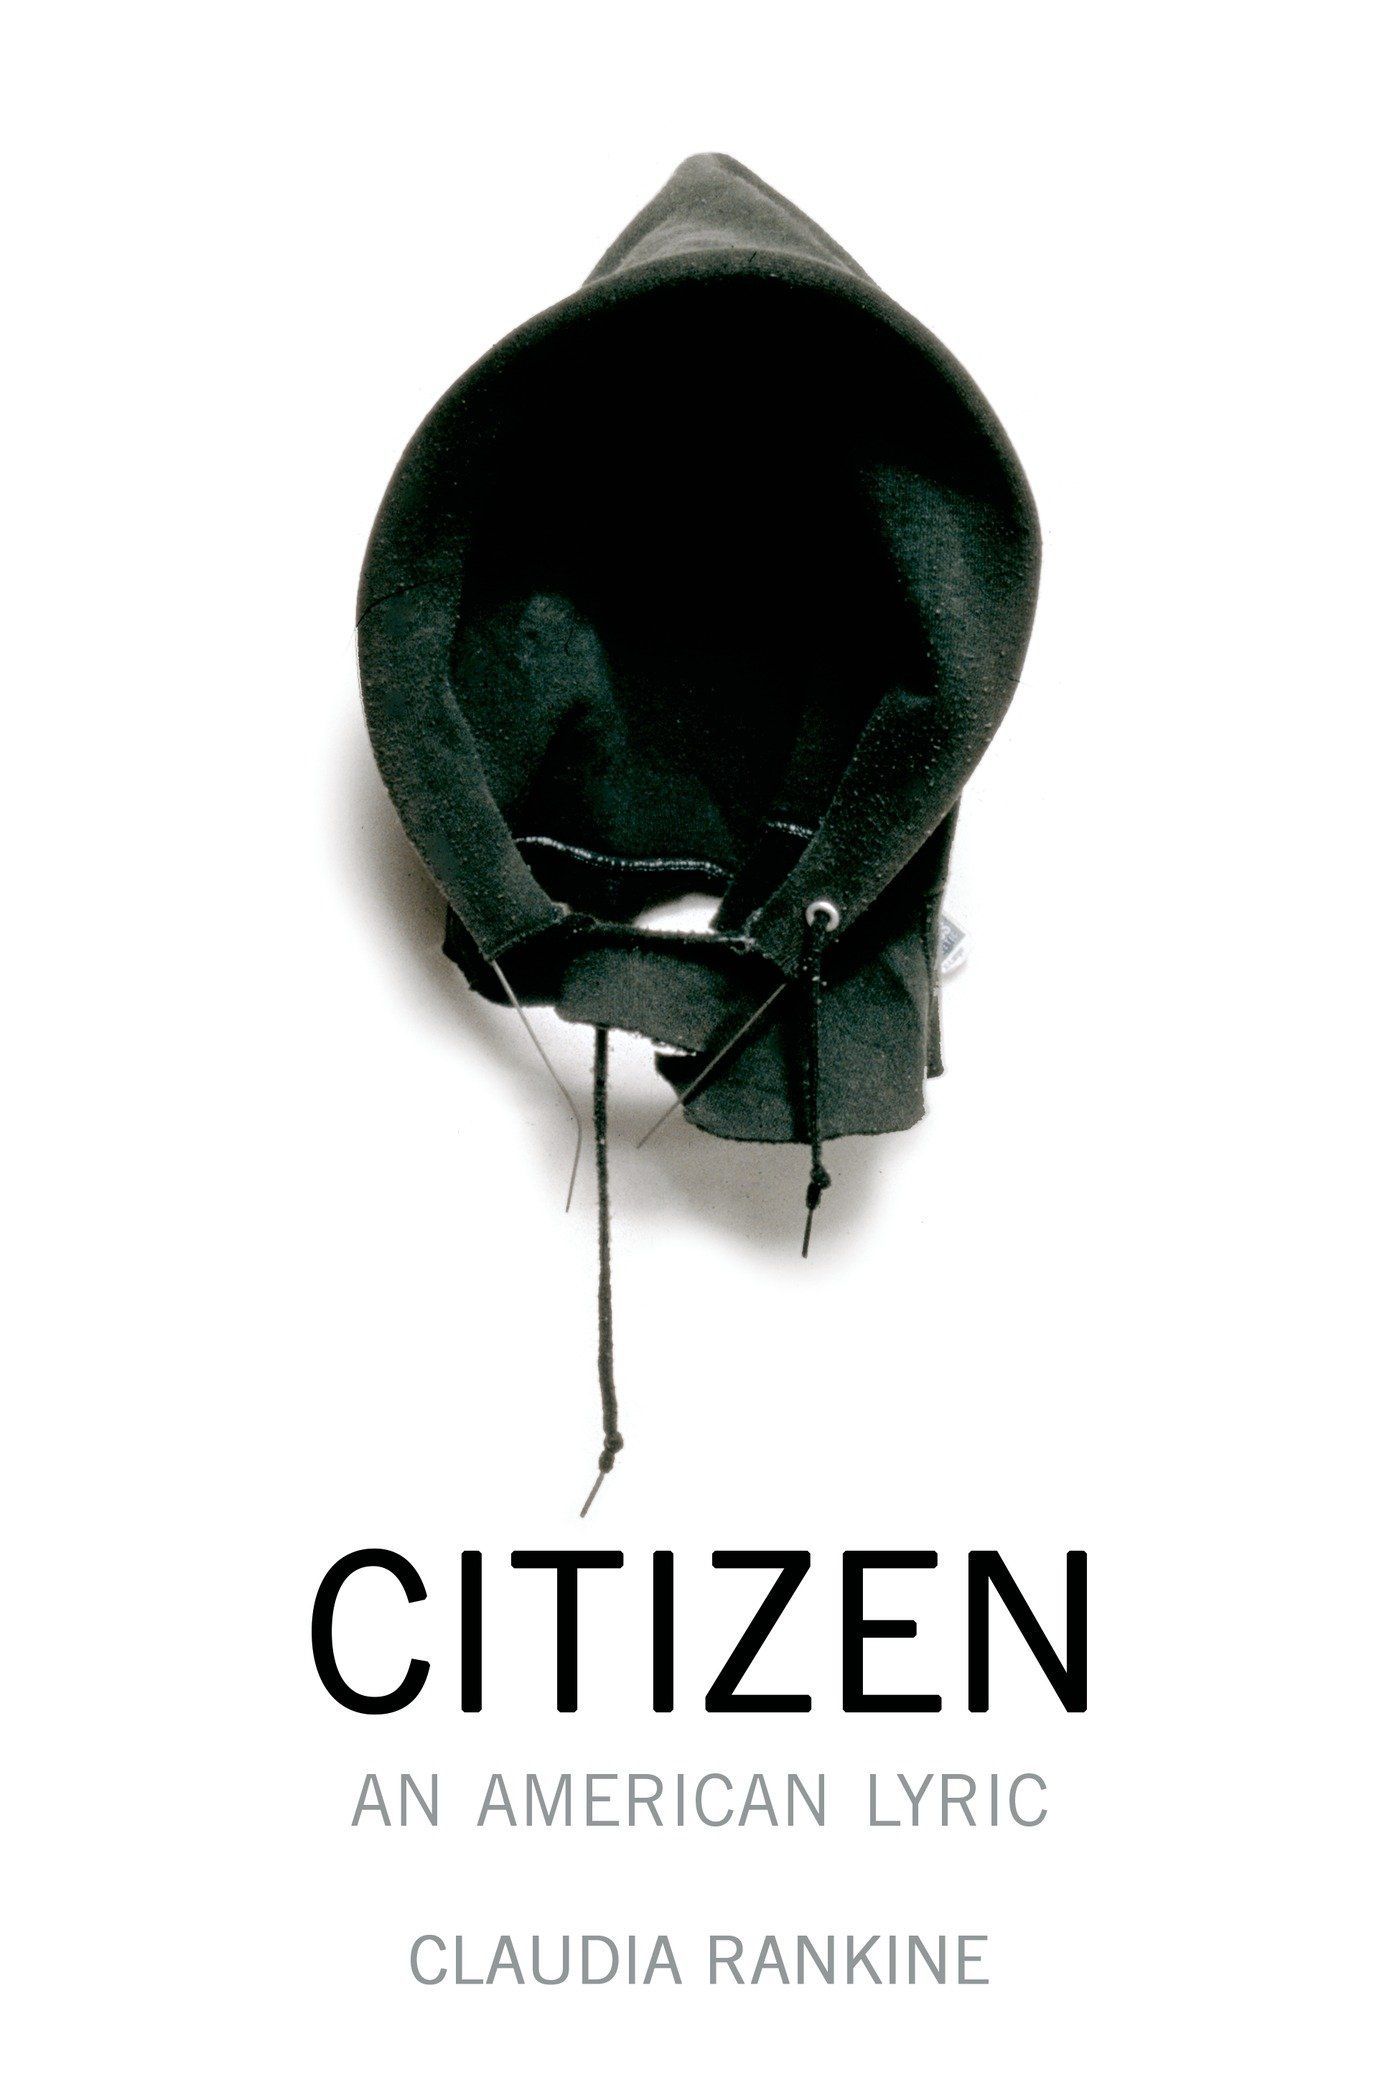 Roundtable on “Citizen: An American Lyric,” Part II